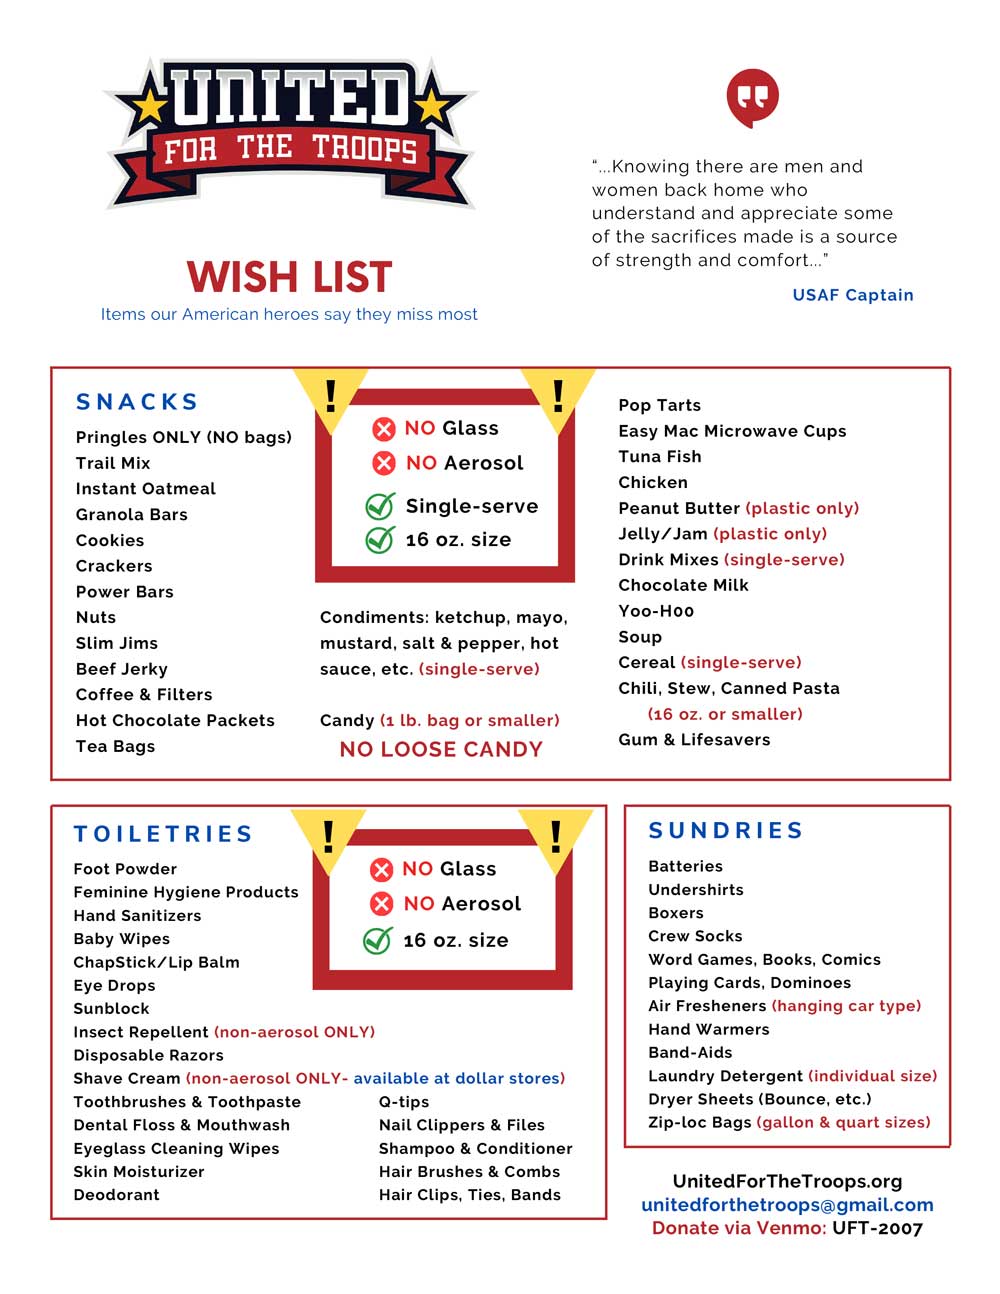 United for the troops Wish List